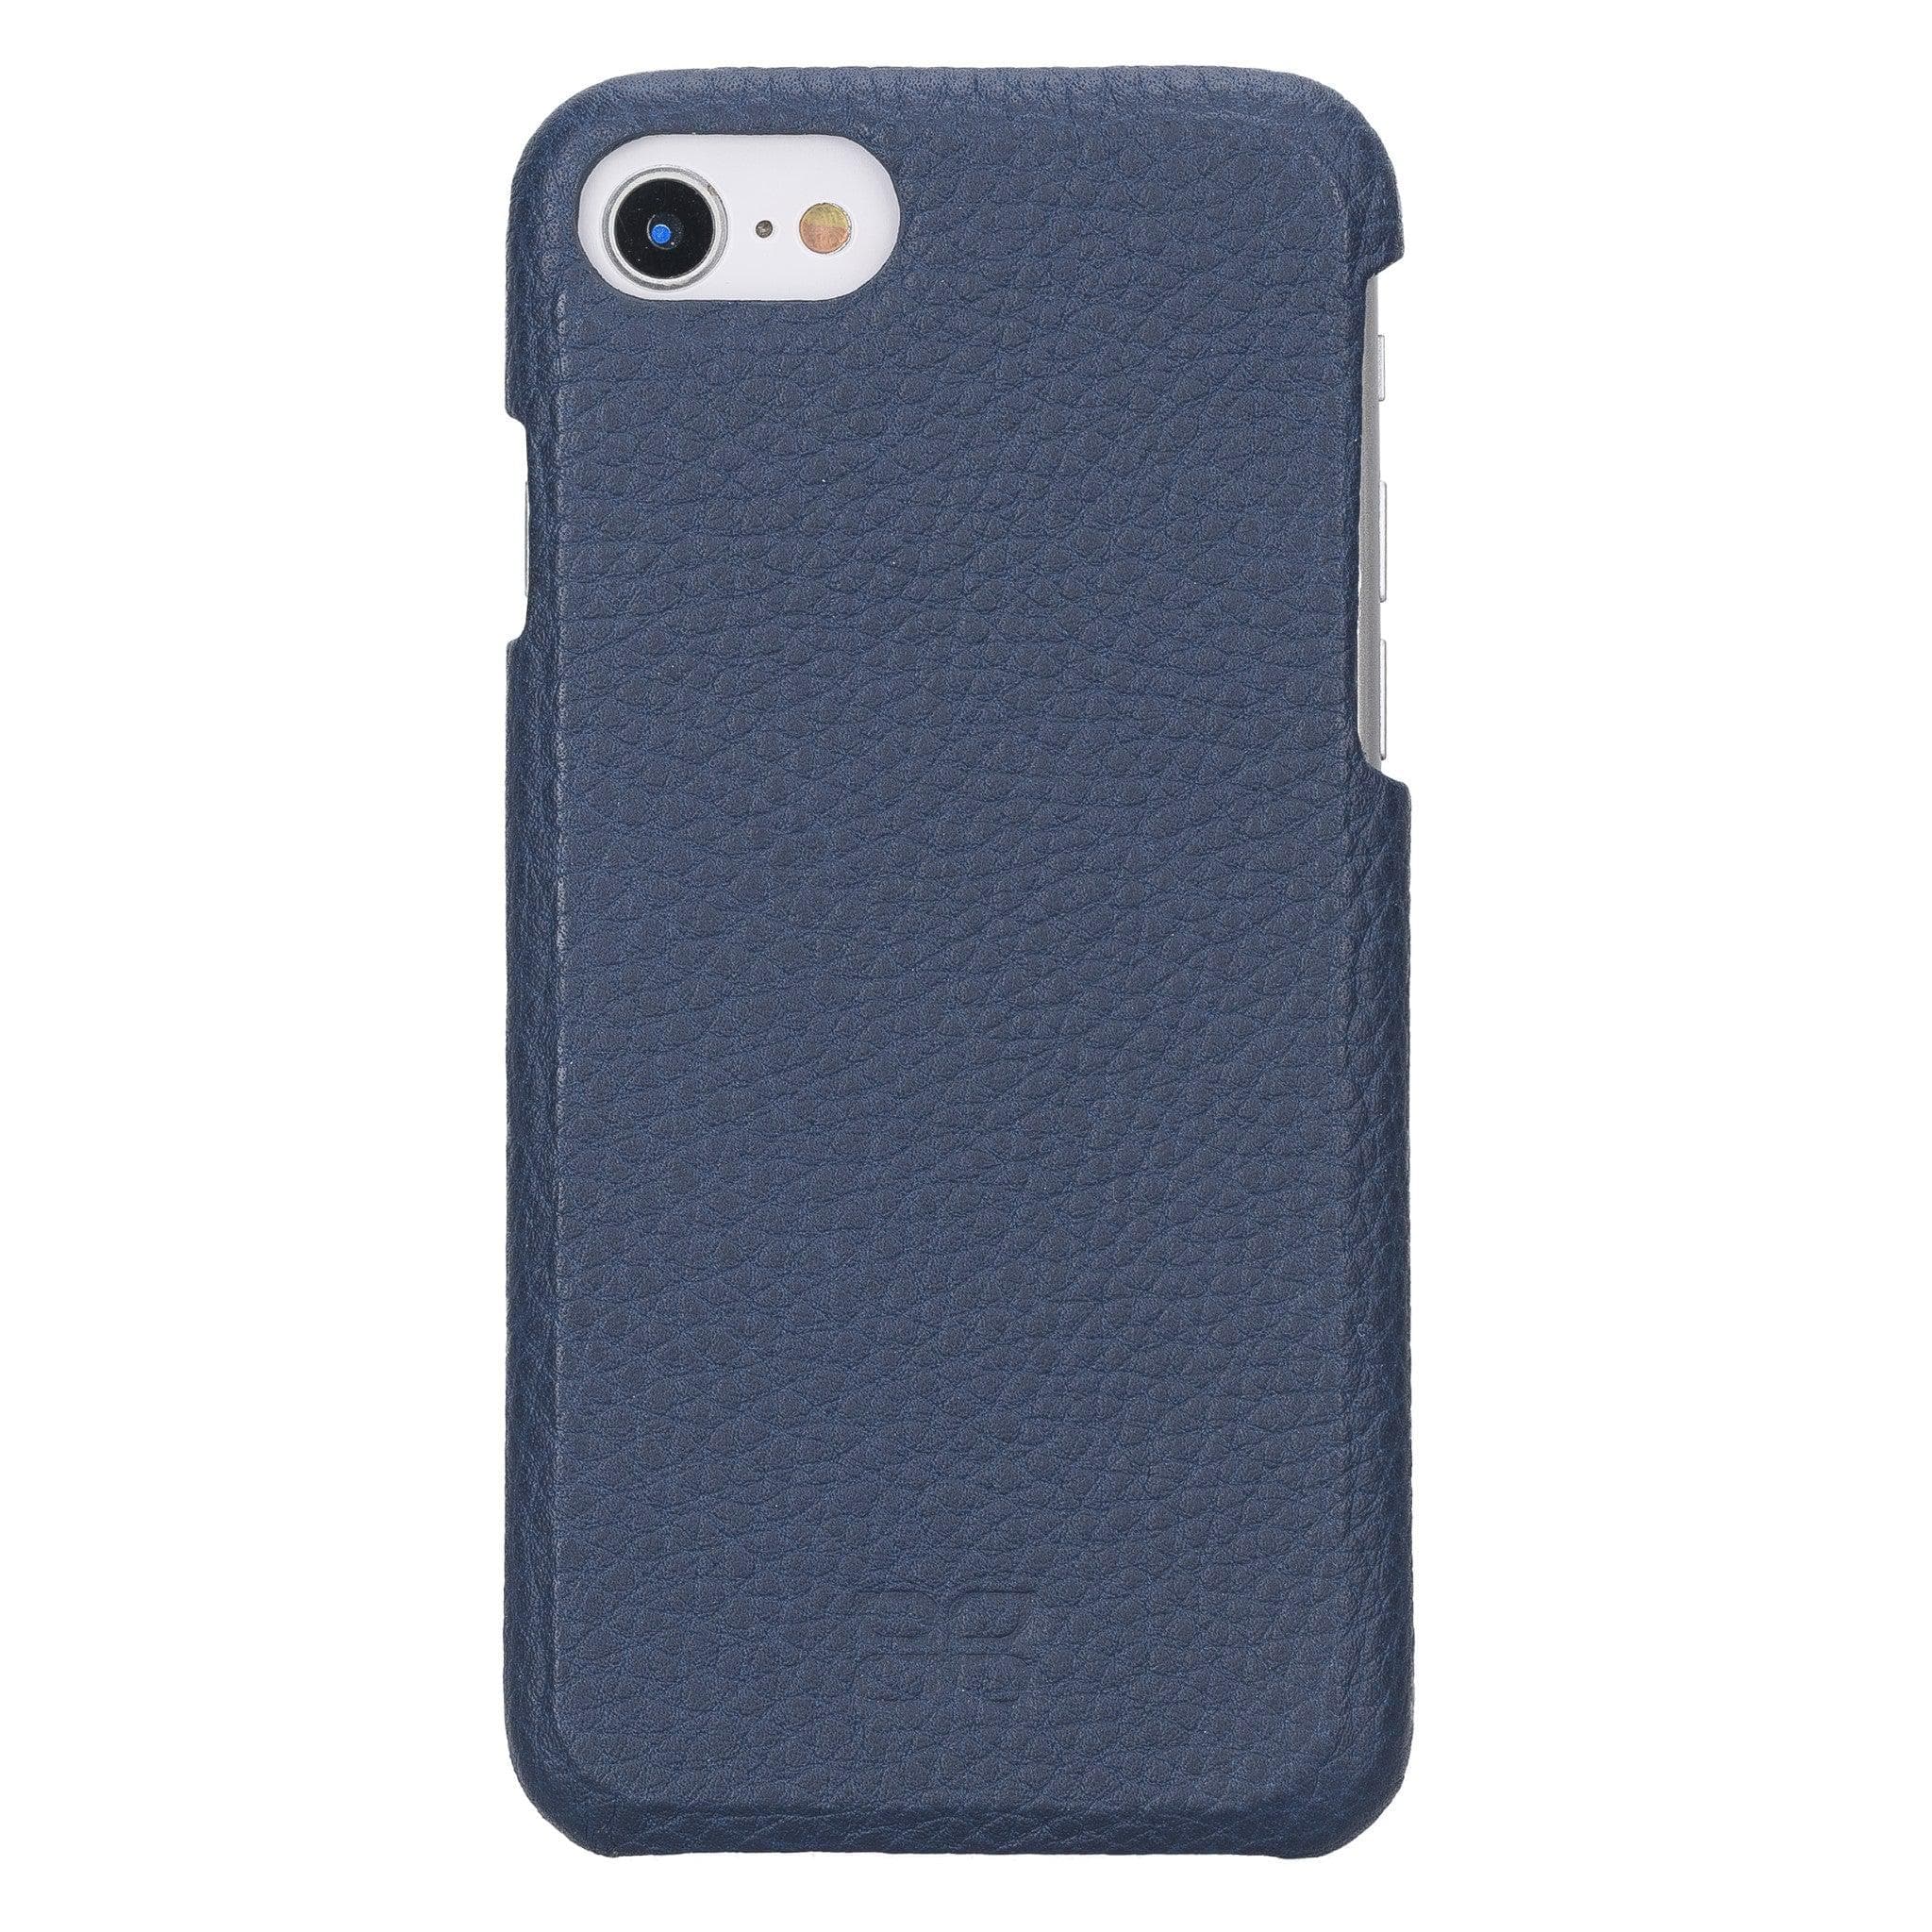 Apple iPhone 7 Series F360 Fully Covering Leather Back Cover Case iPhone 7 / Floater Dark Blue Bornbor LTD